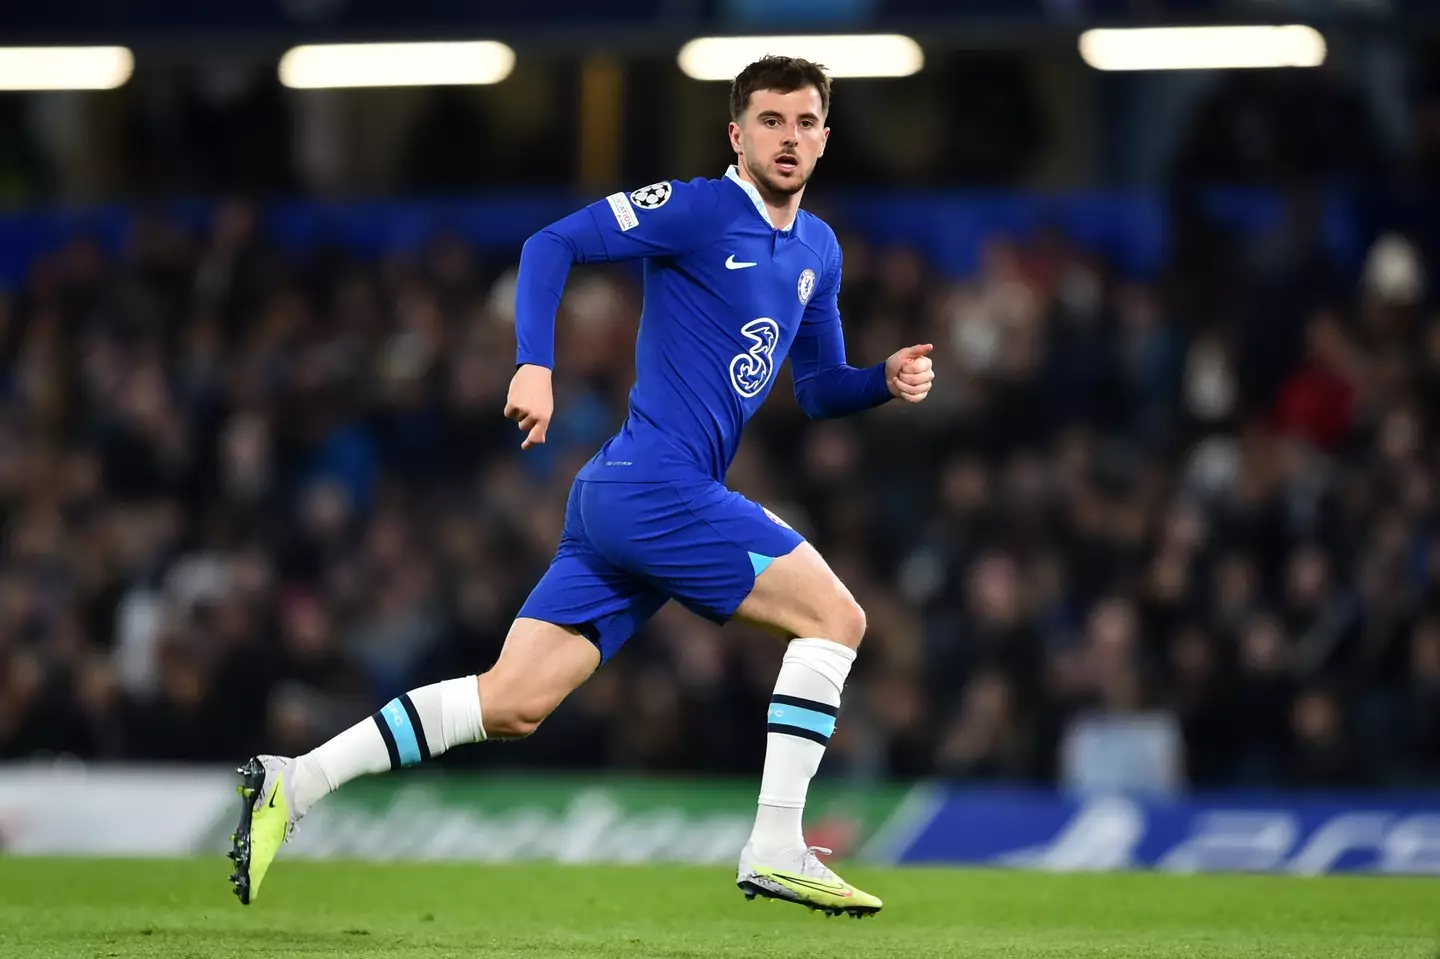 Mason Mount in action for Chelsea. Image: Getty